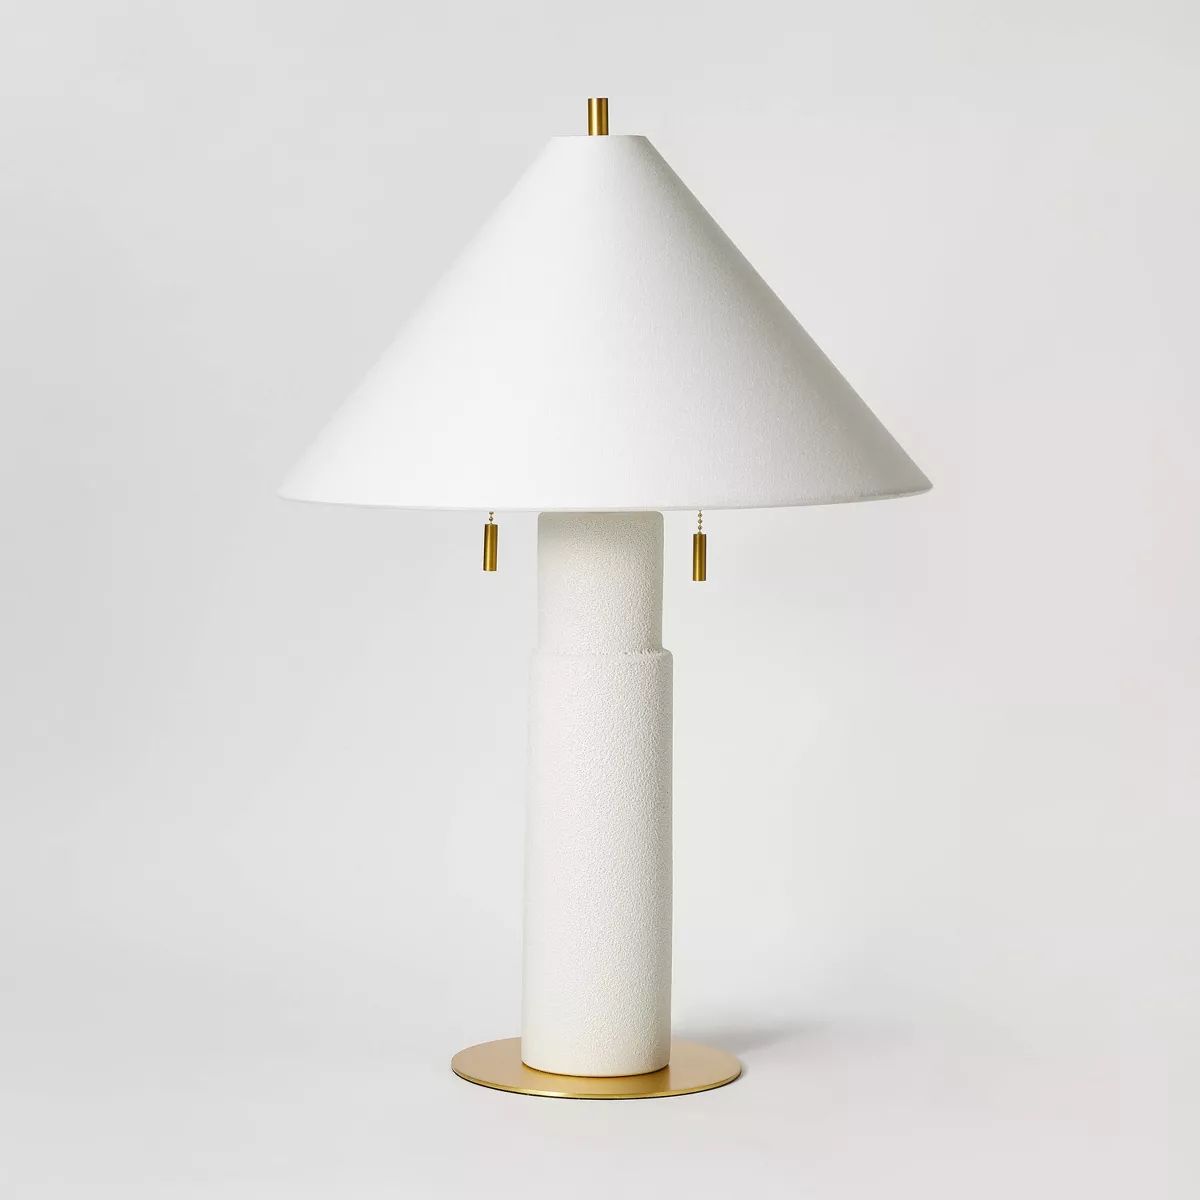 26"x17.5" Ceramic Table Lamp with Tapered Shade White - Threshold™ designed with Studio McGee | Target